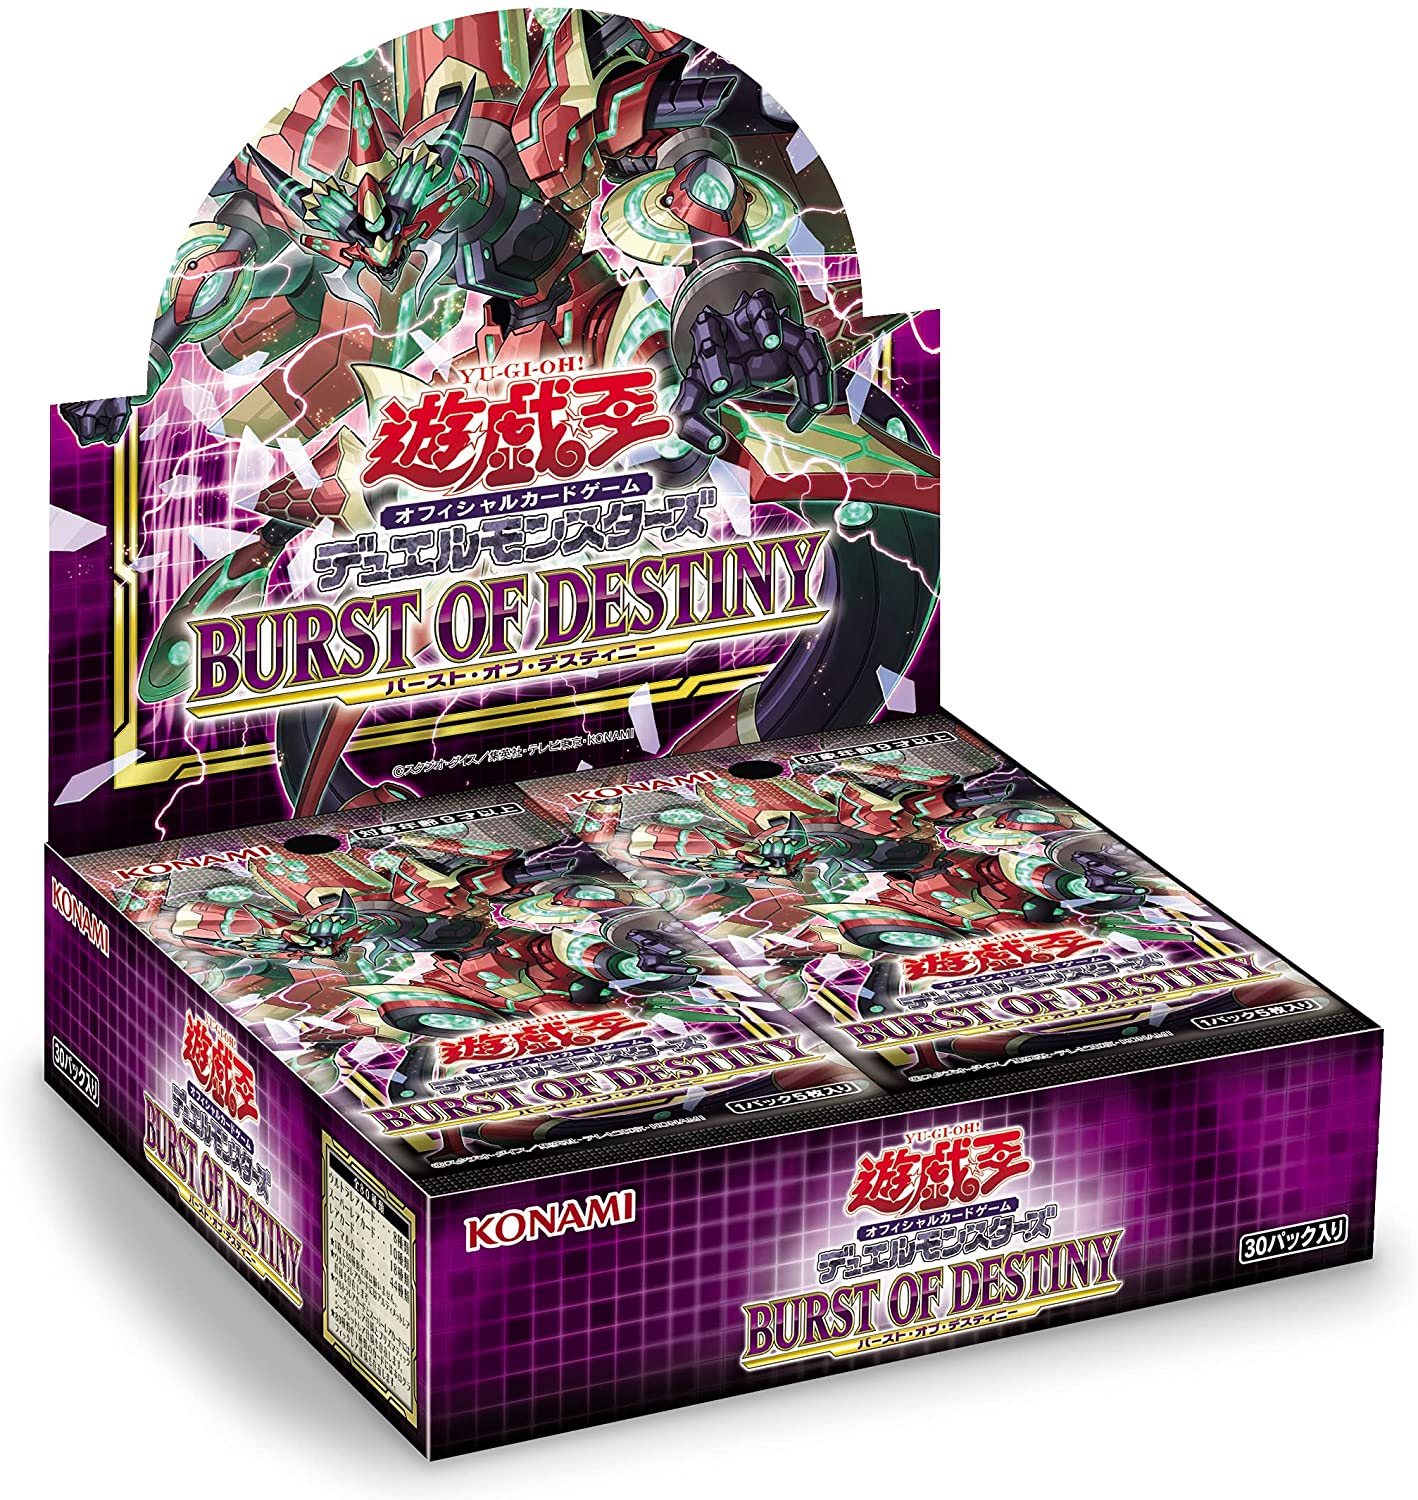 Yu-Gi-Oh! Official Card Game Duel Monsters ｢BURST OF DESTINY｣ Box